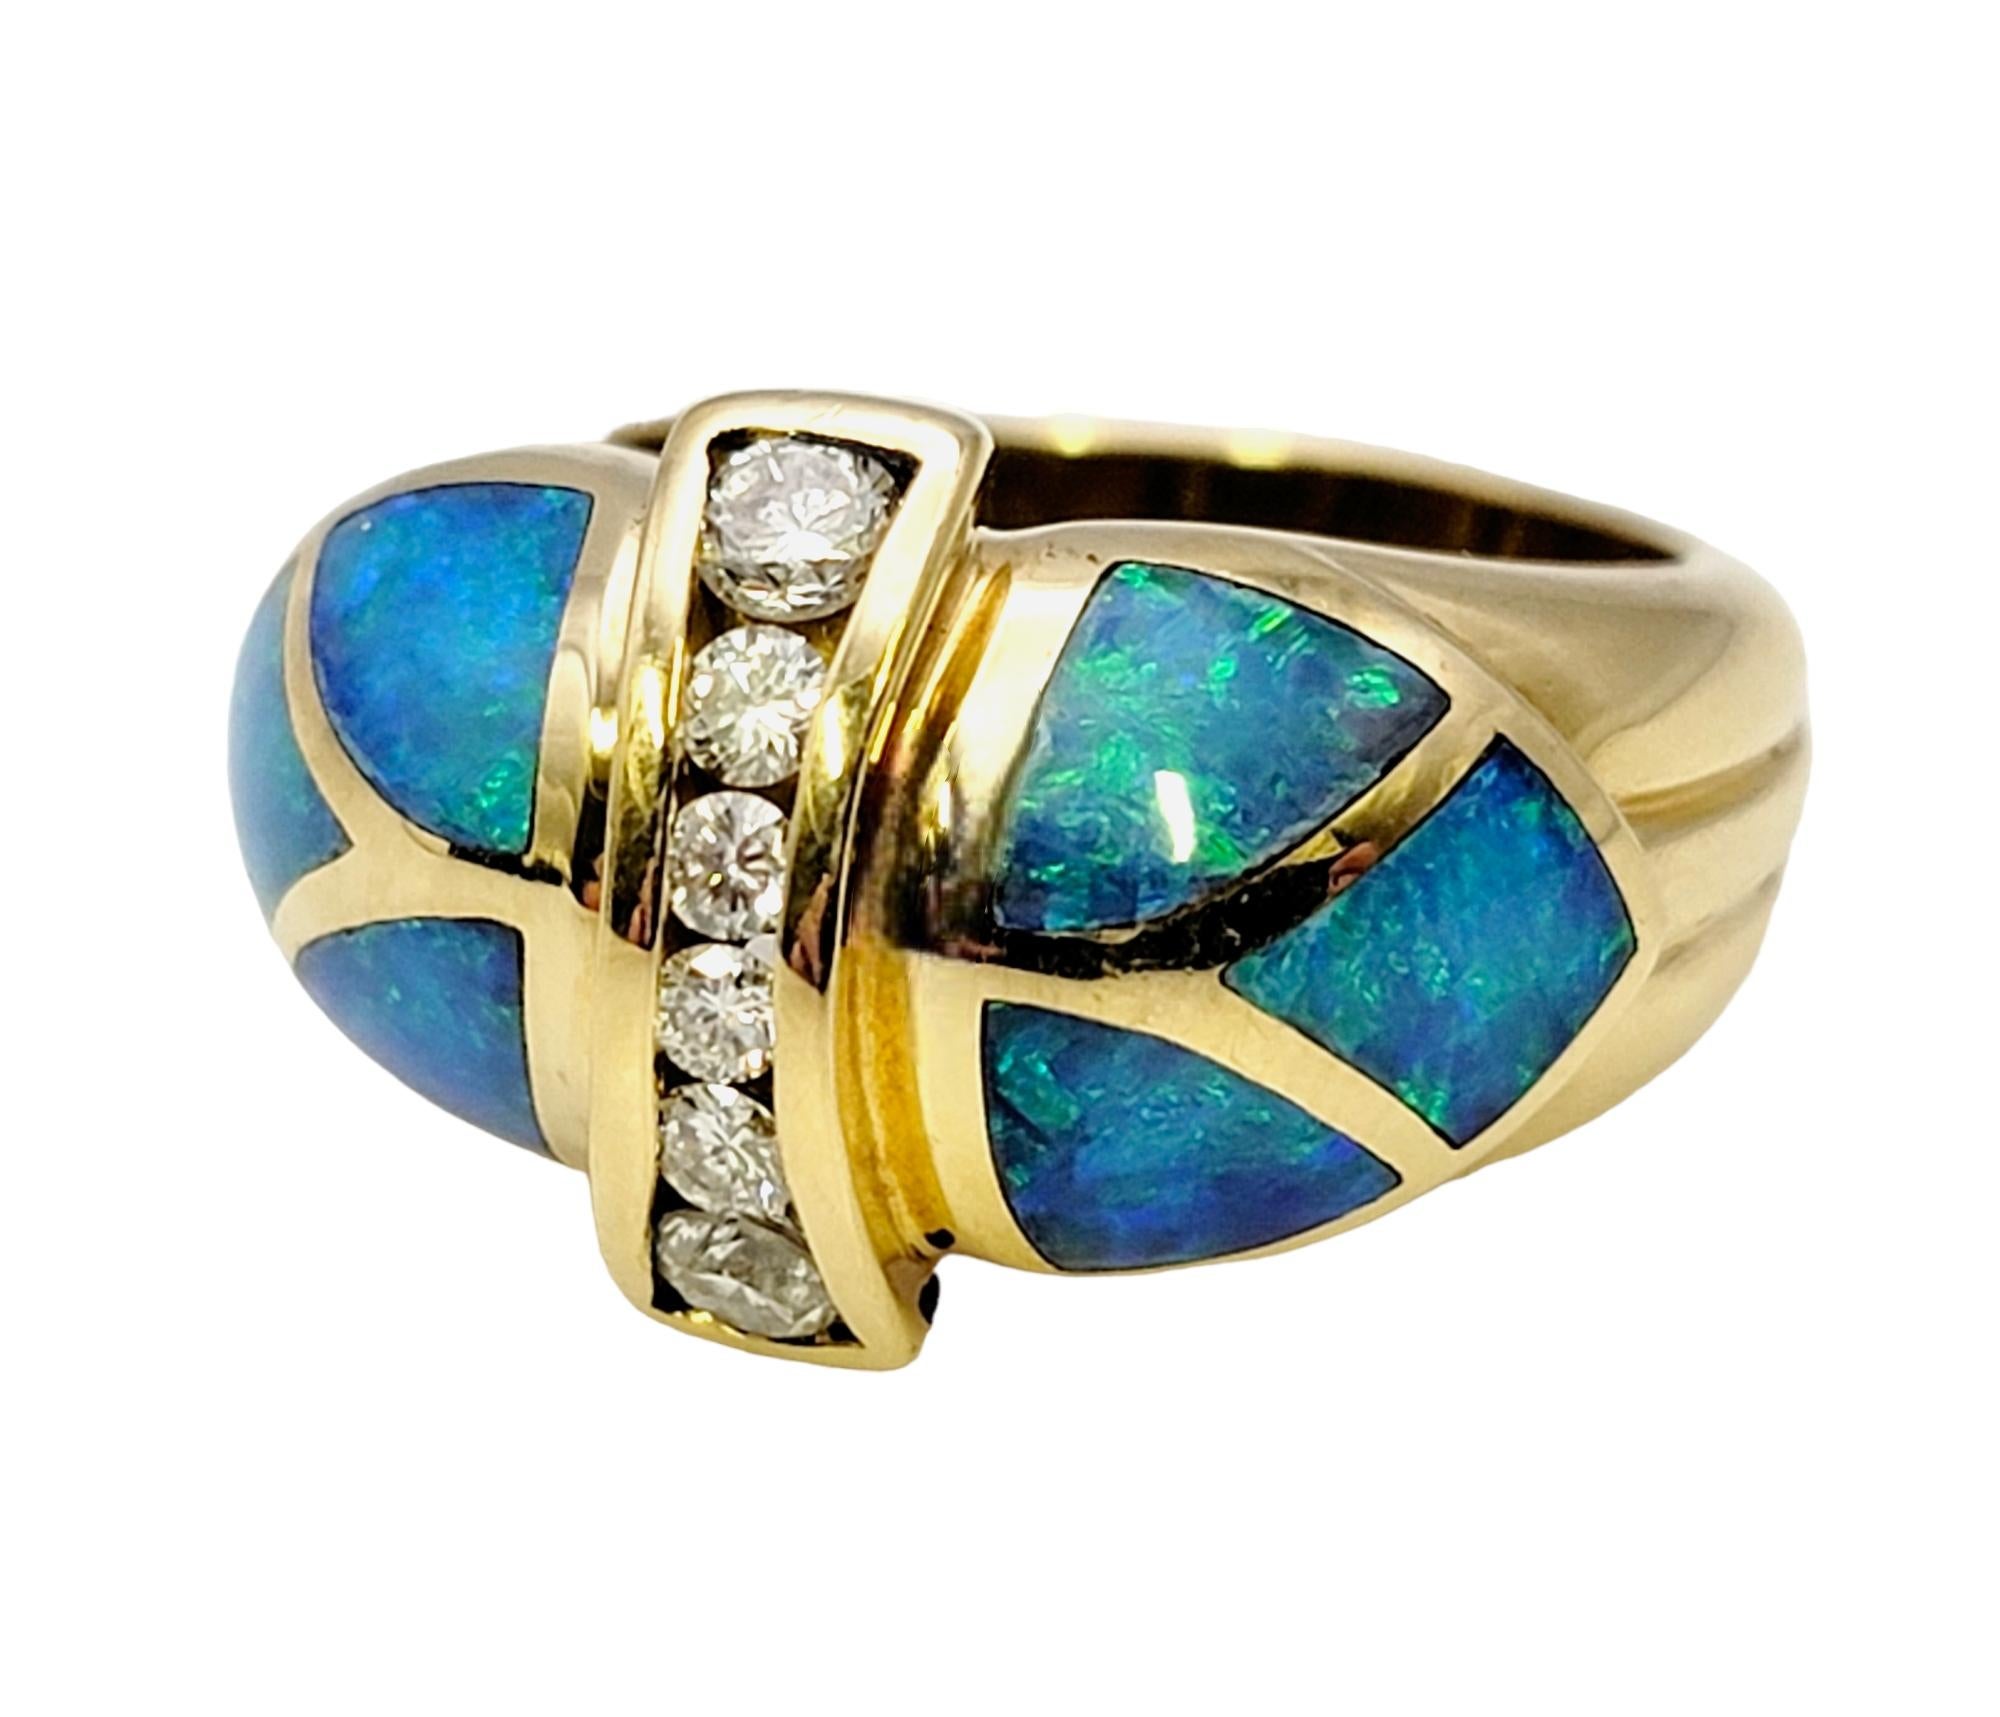 Diamond and Black Opal Inlay Domed Band Ring in 18 Karat Yellow Gold In Good Condition For Sale In Scottsdale, AZ